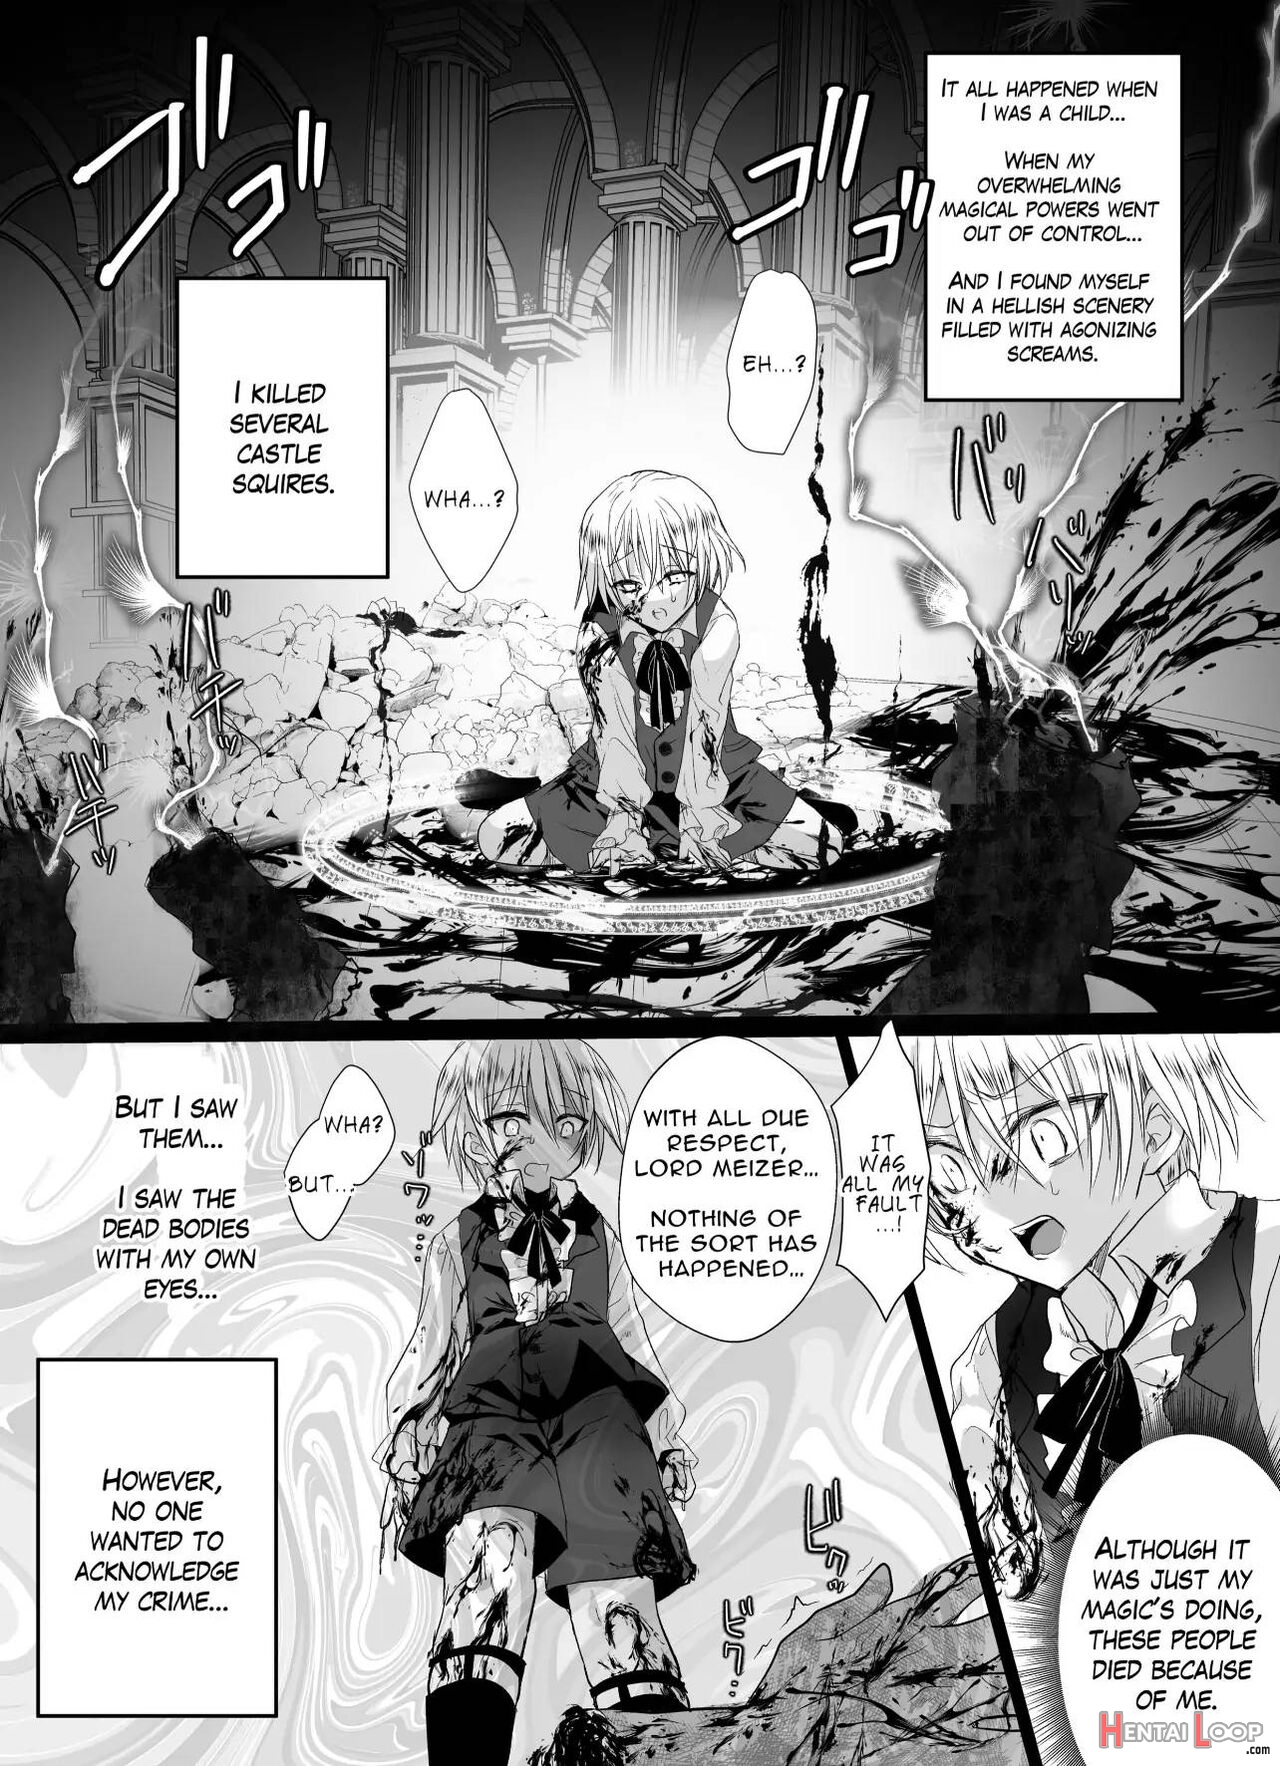  jk's Tragic Isekai Reincarnation As The Villainess ~but My Precious Side Character!~ page 20